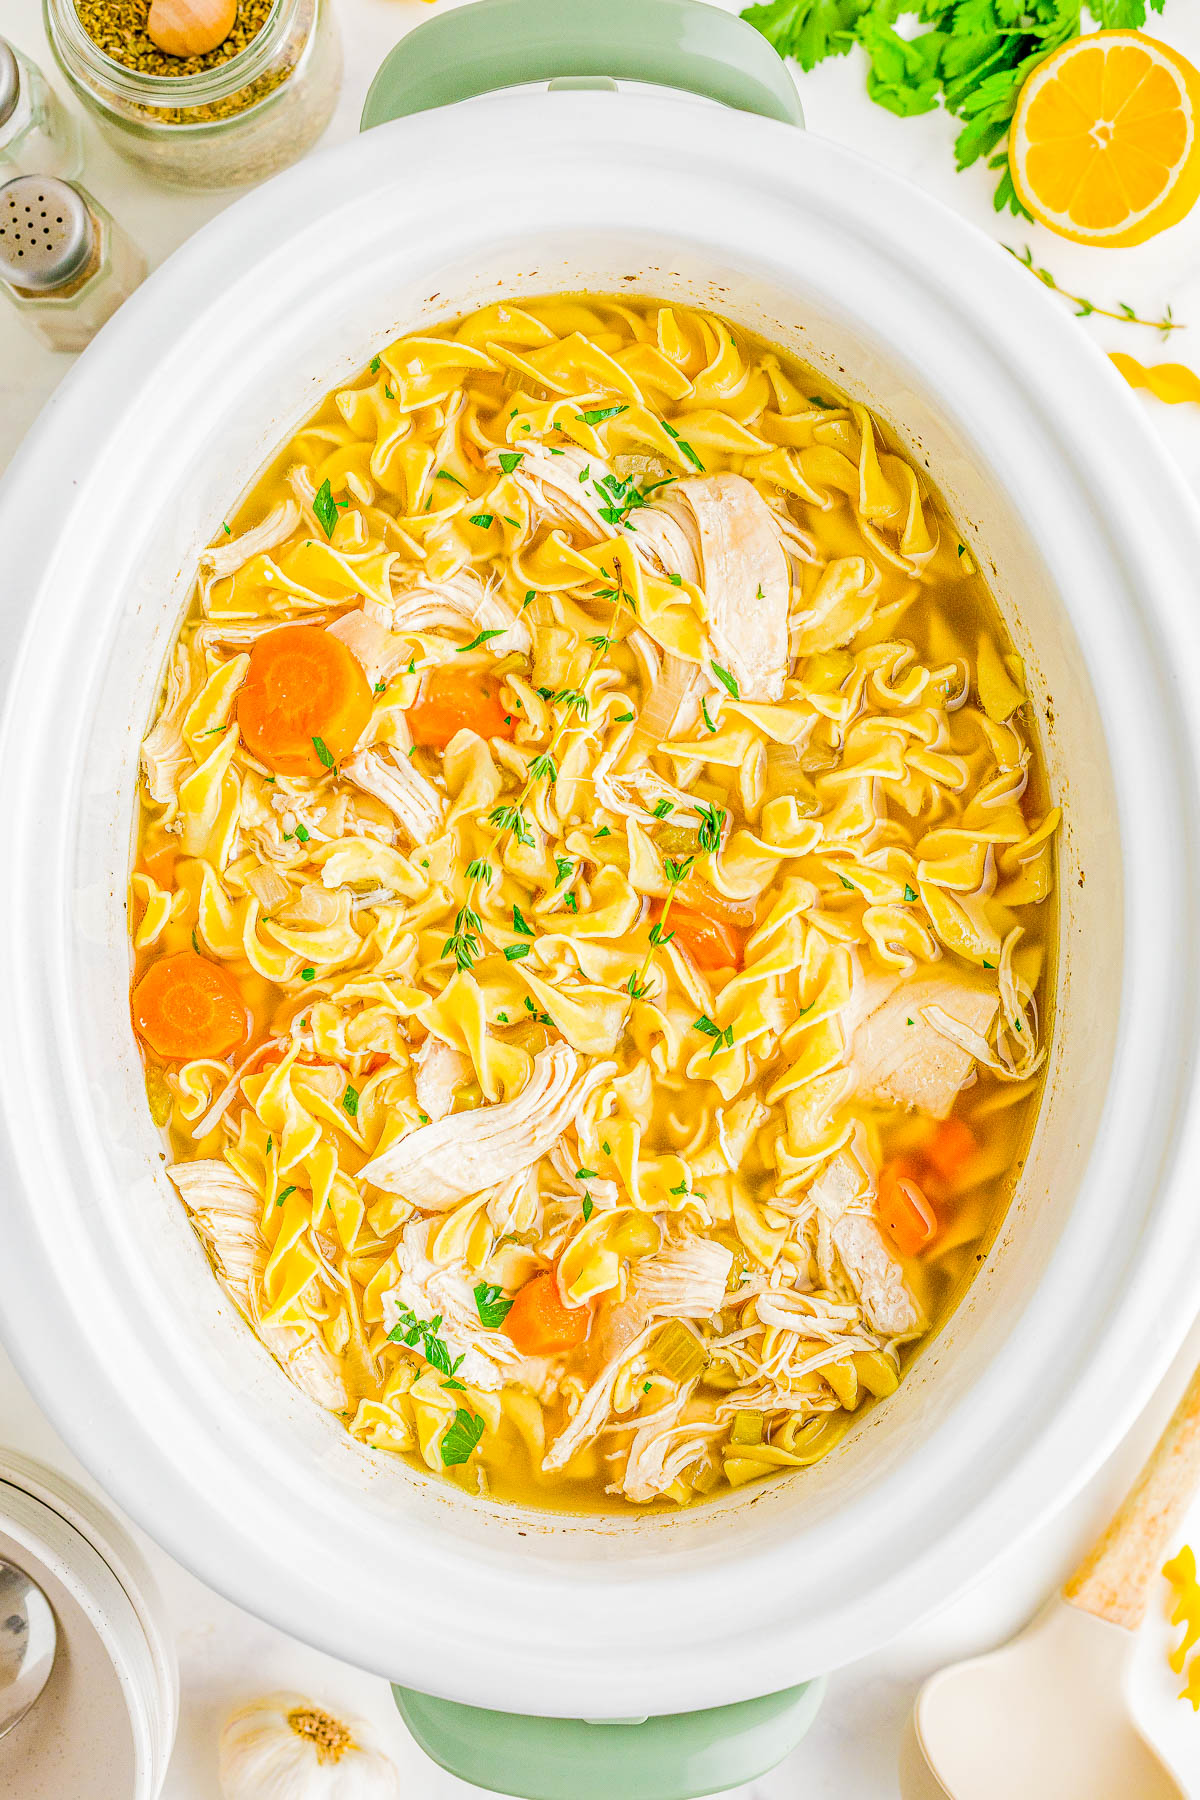 The Healthiest Store-Bought Chicken Soups (That Taste Like Grandma's)